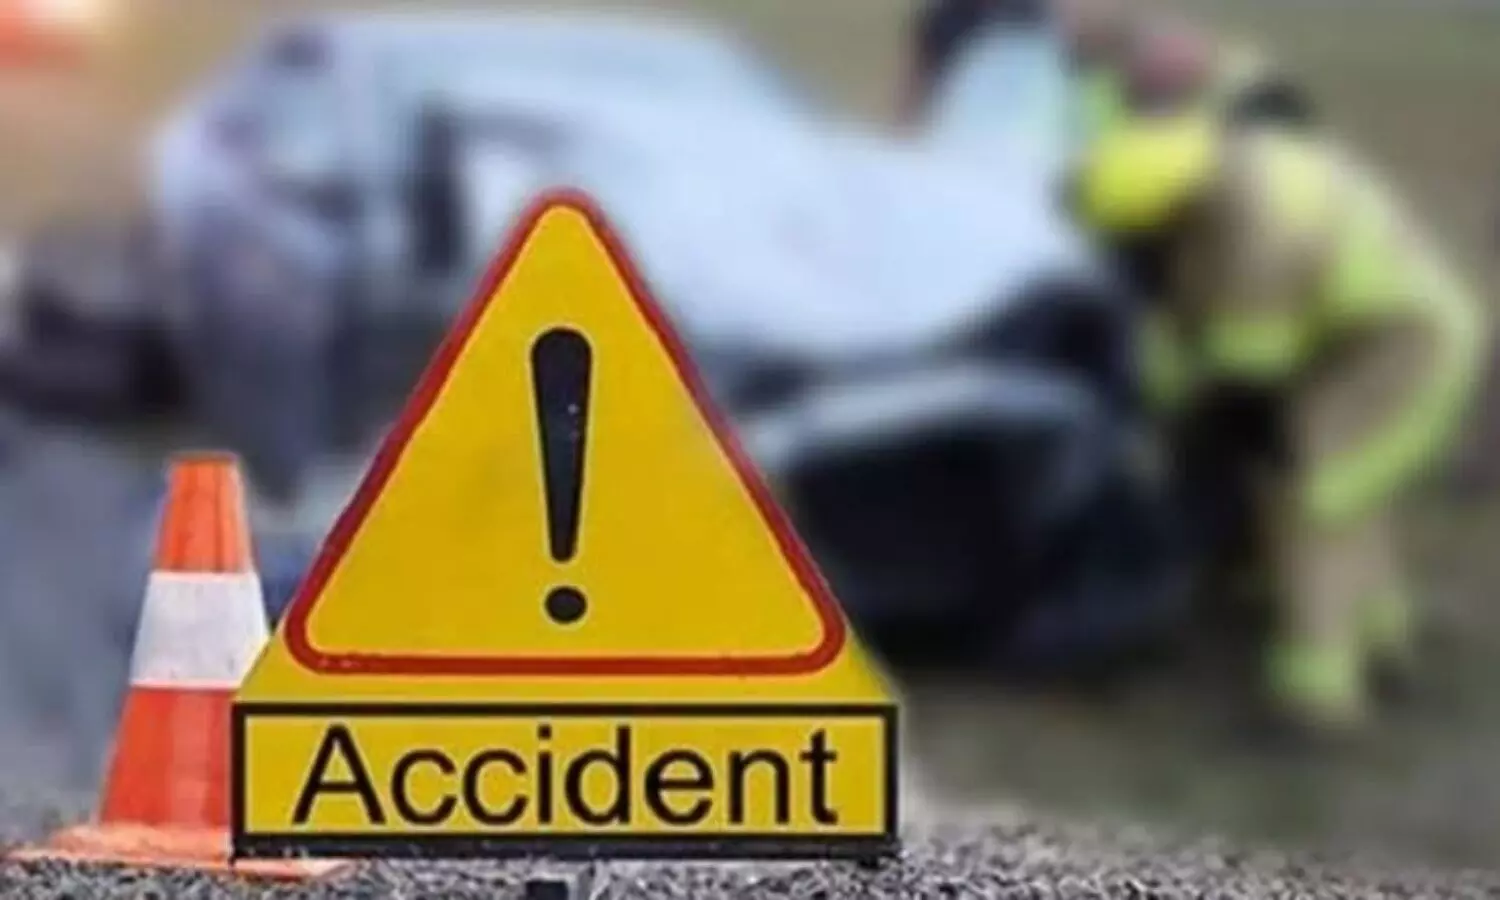 Road Accident News